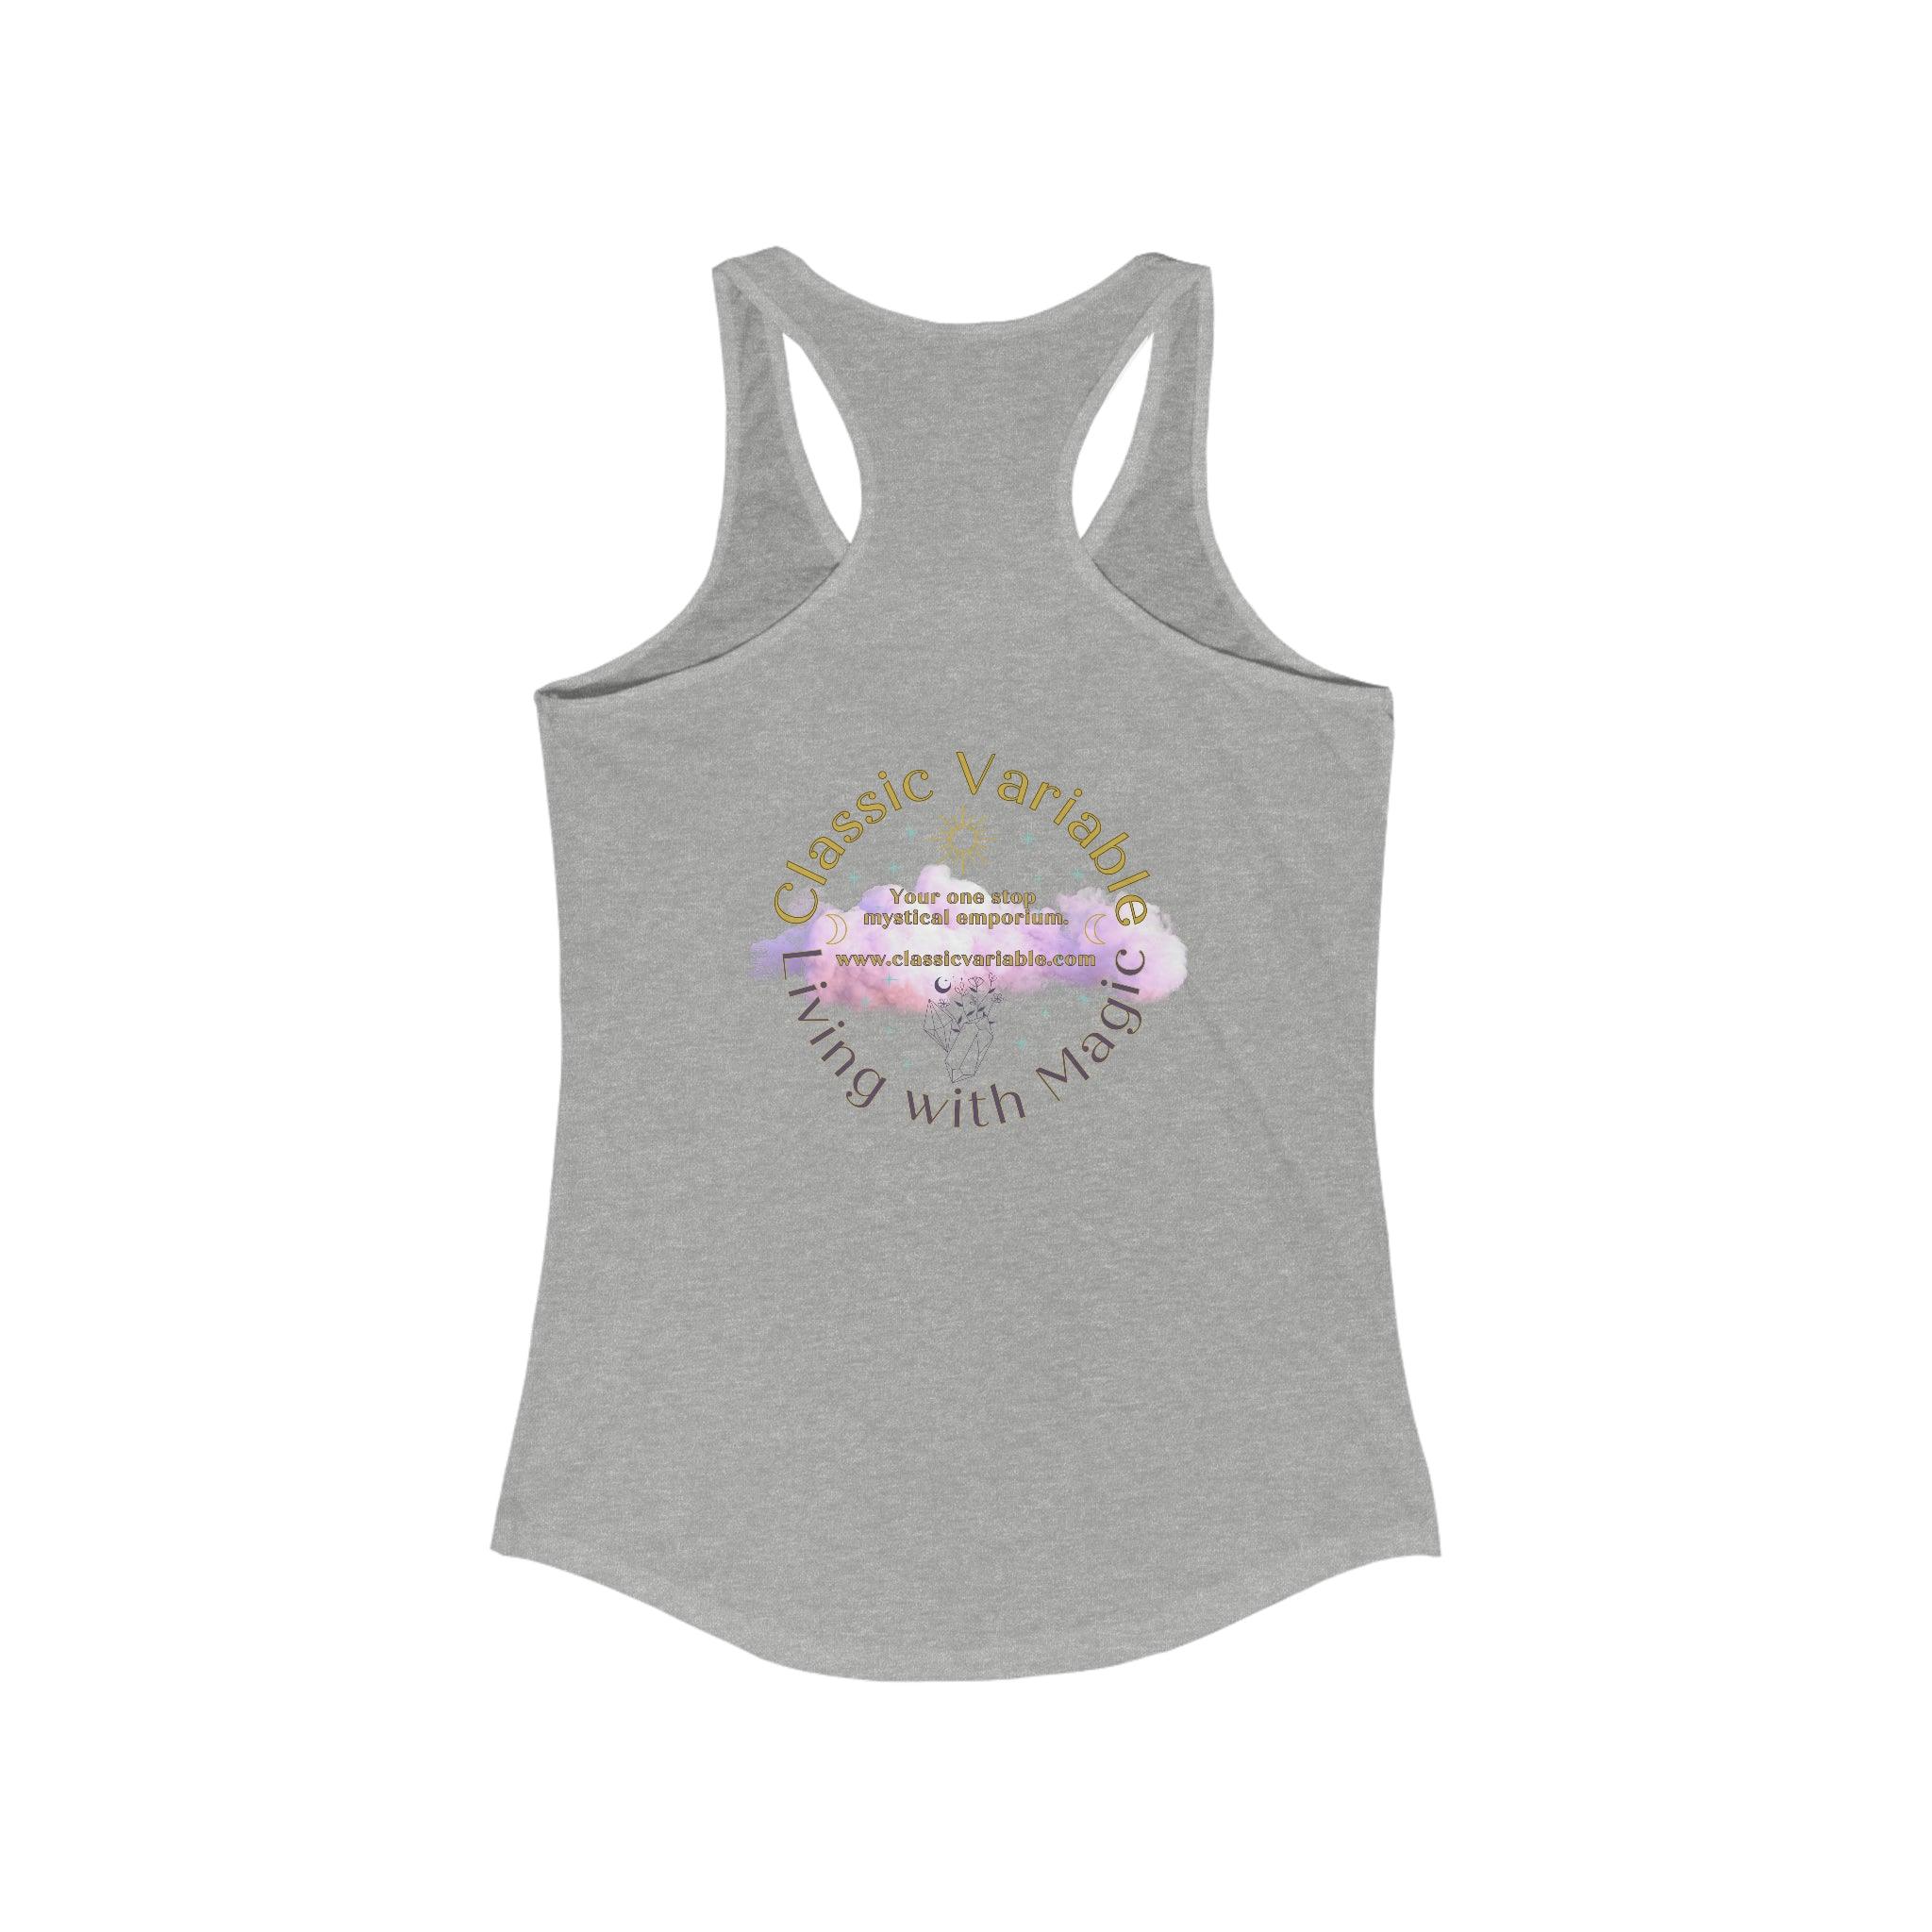 Classic Variable Racerback Tank - Classic Variable